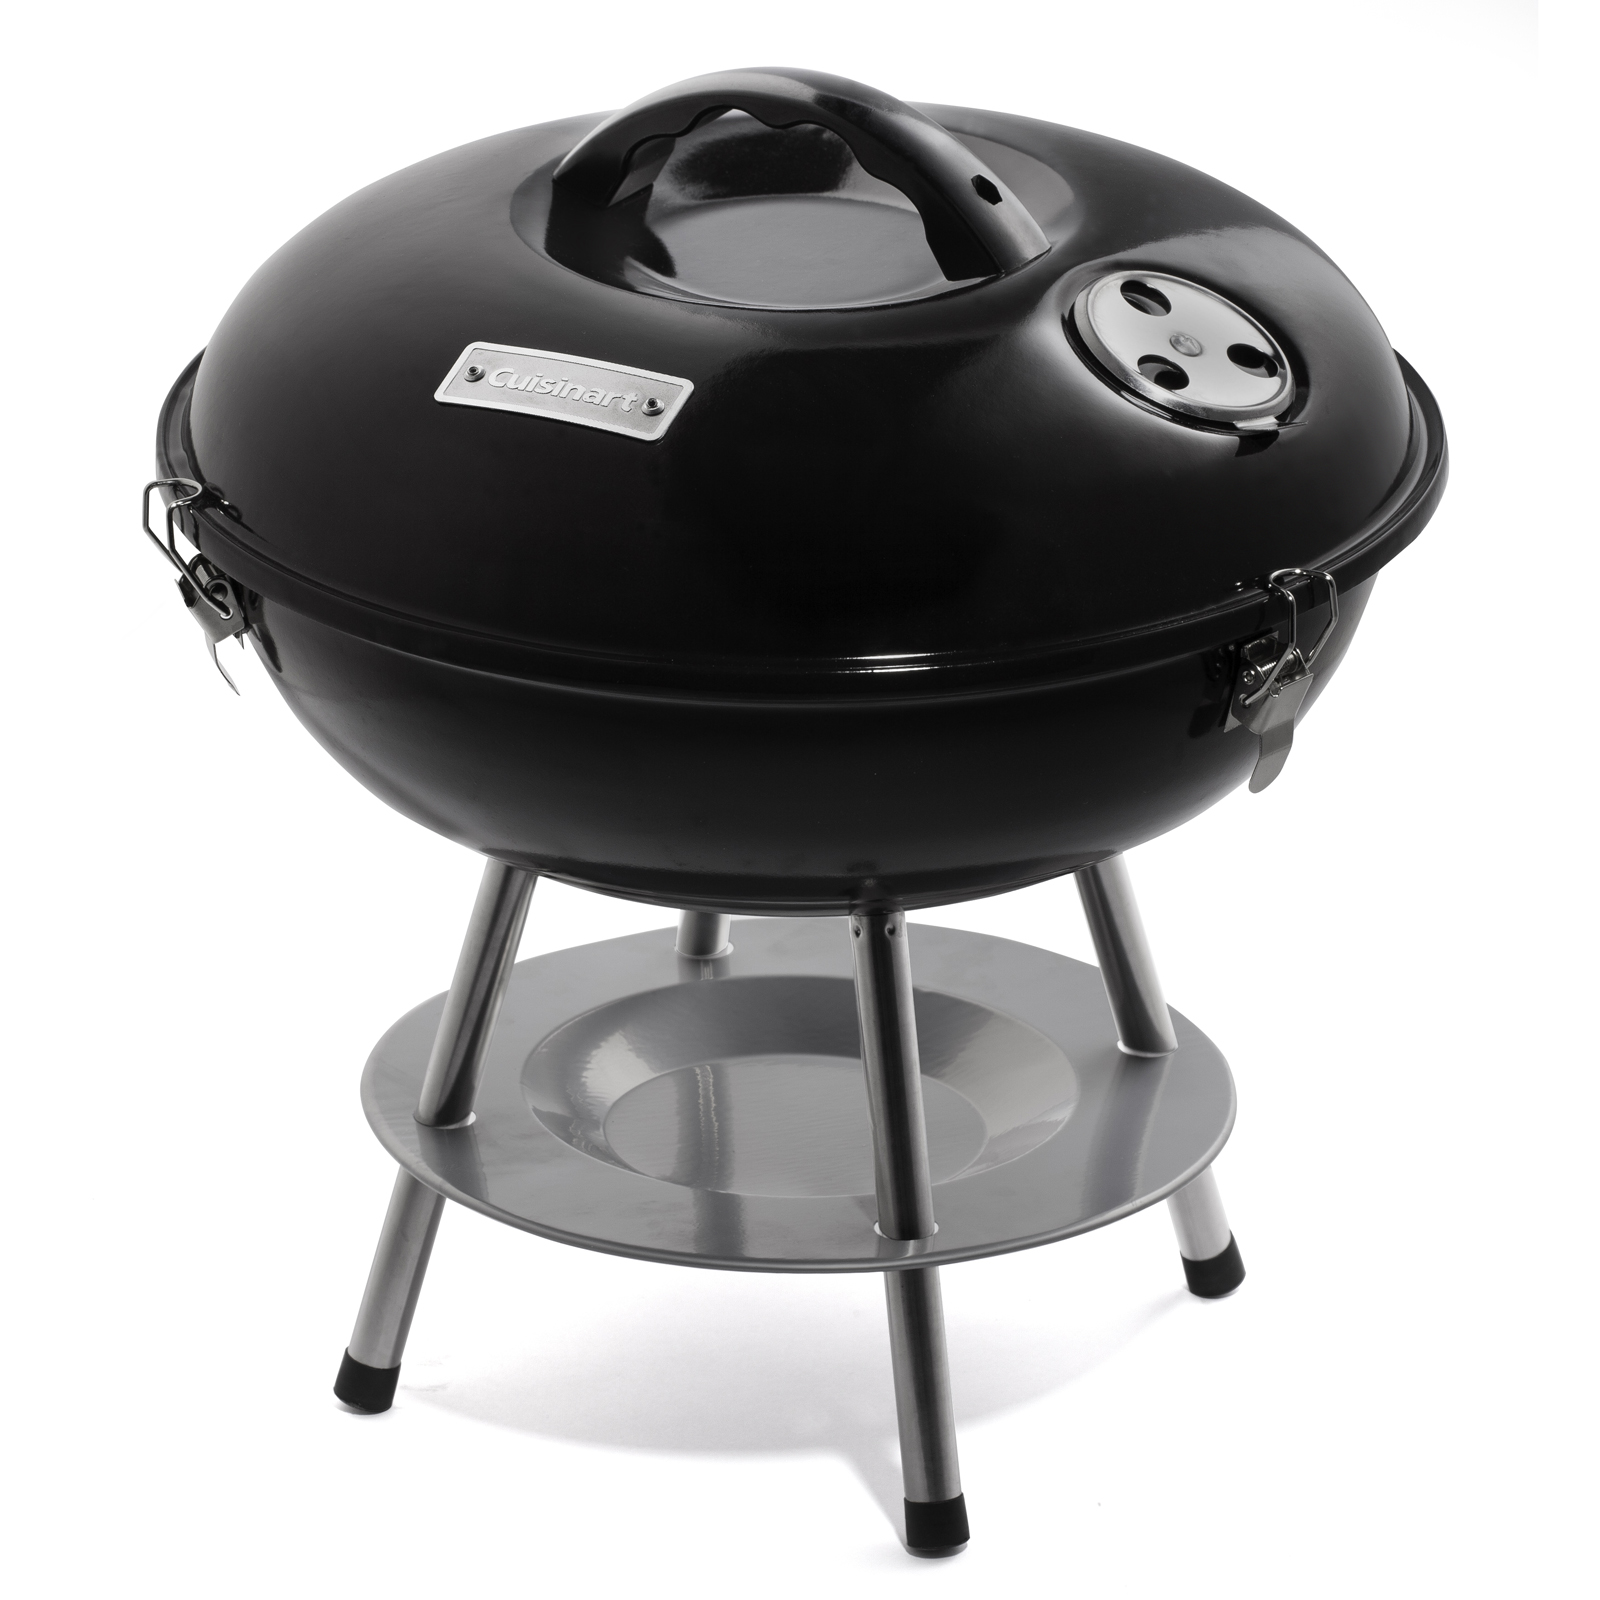 Cuisinart Portable Charcoal Grill - image 1 of 7